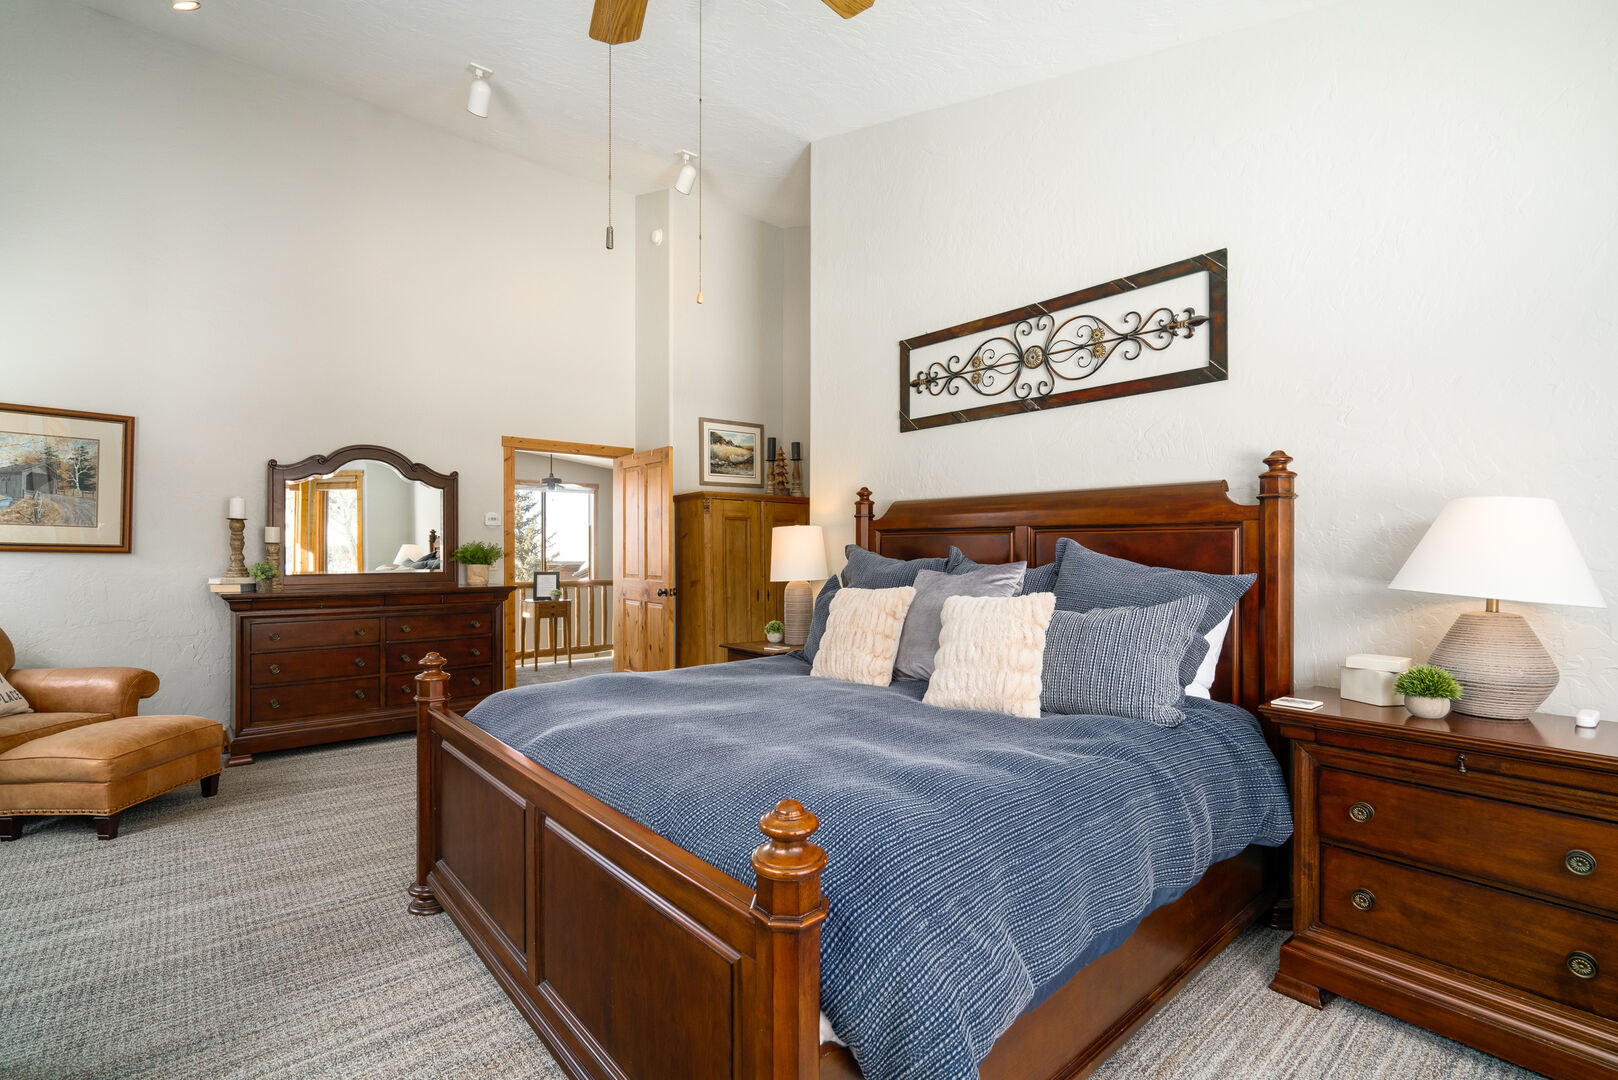 Very large master bedroom, a sanctuary!